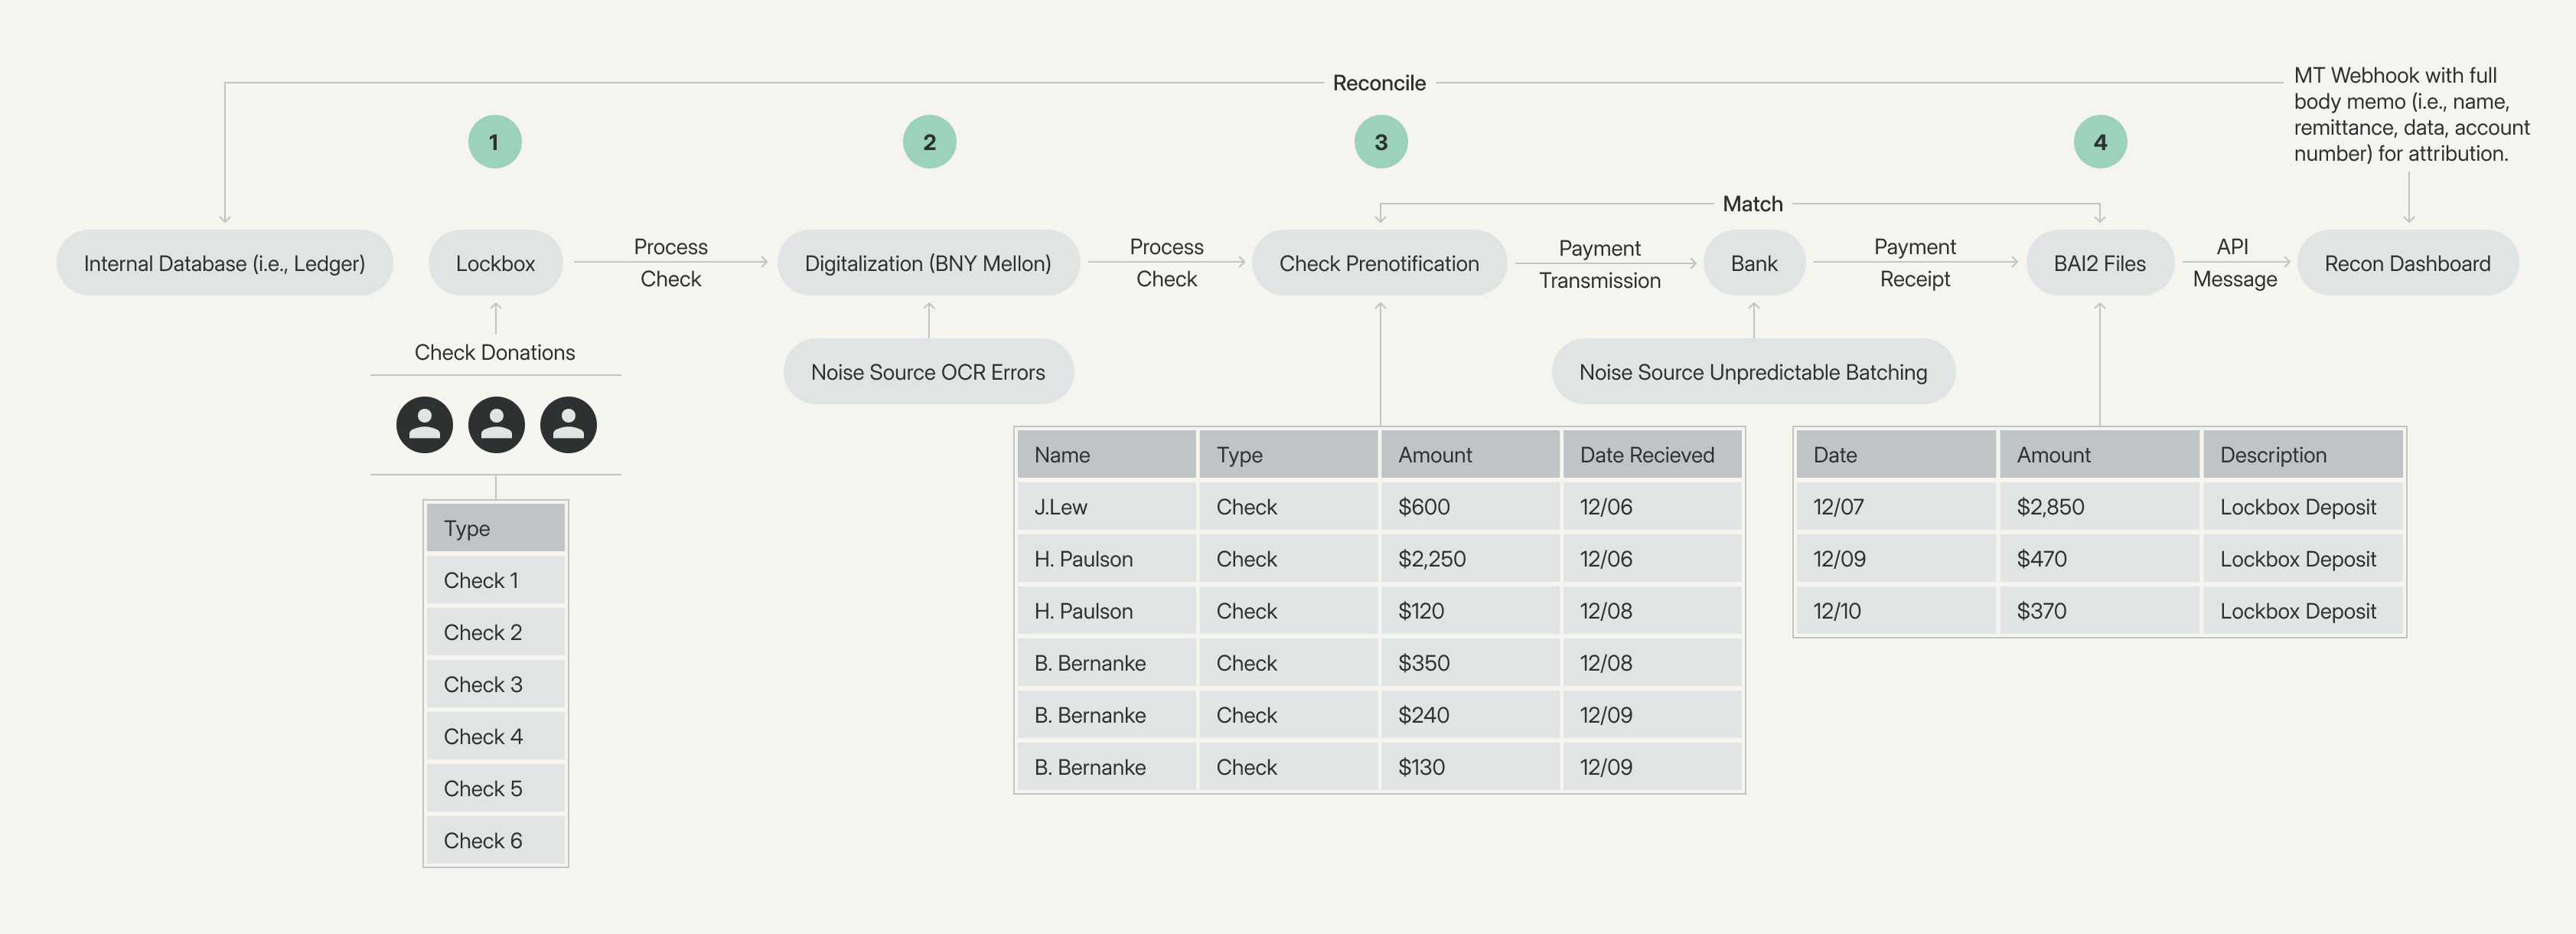 A look at the reconciliation process for checks